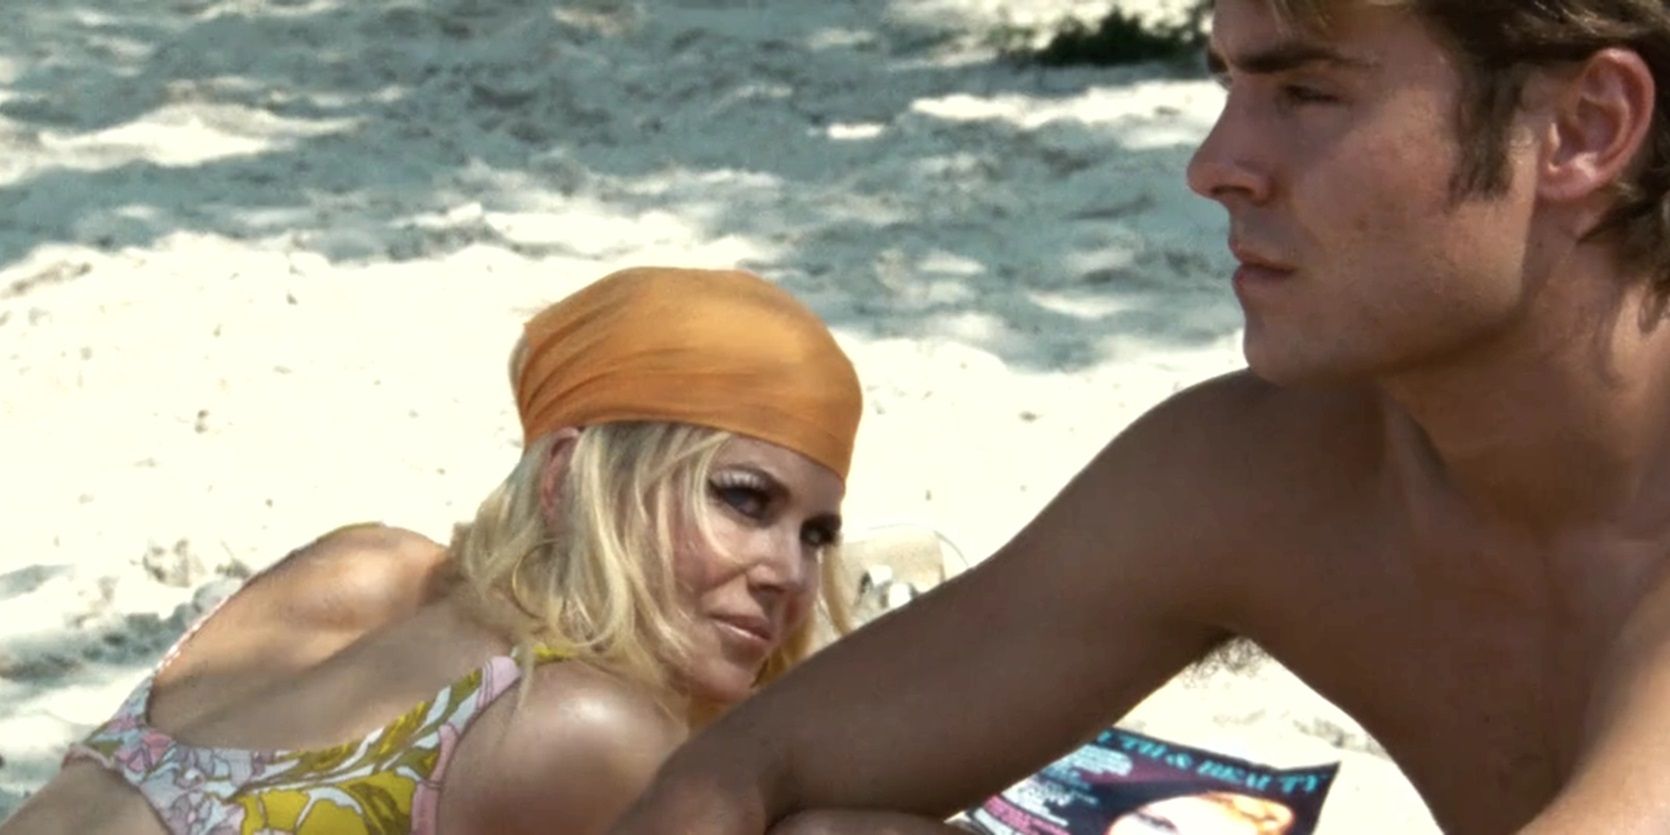 Zac Efron and Nicole Kidman on the beach in The Paperboy